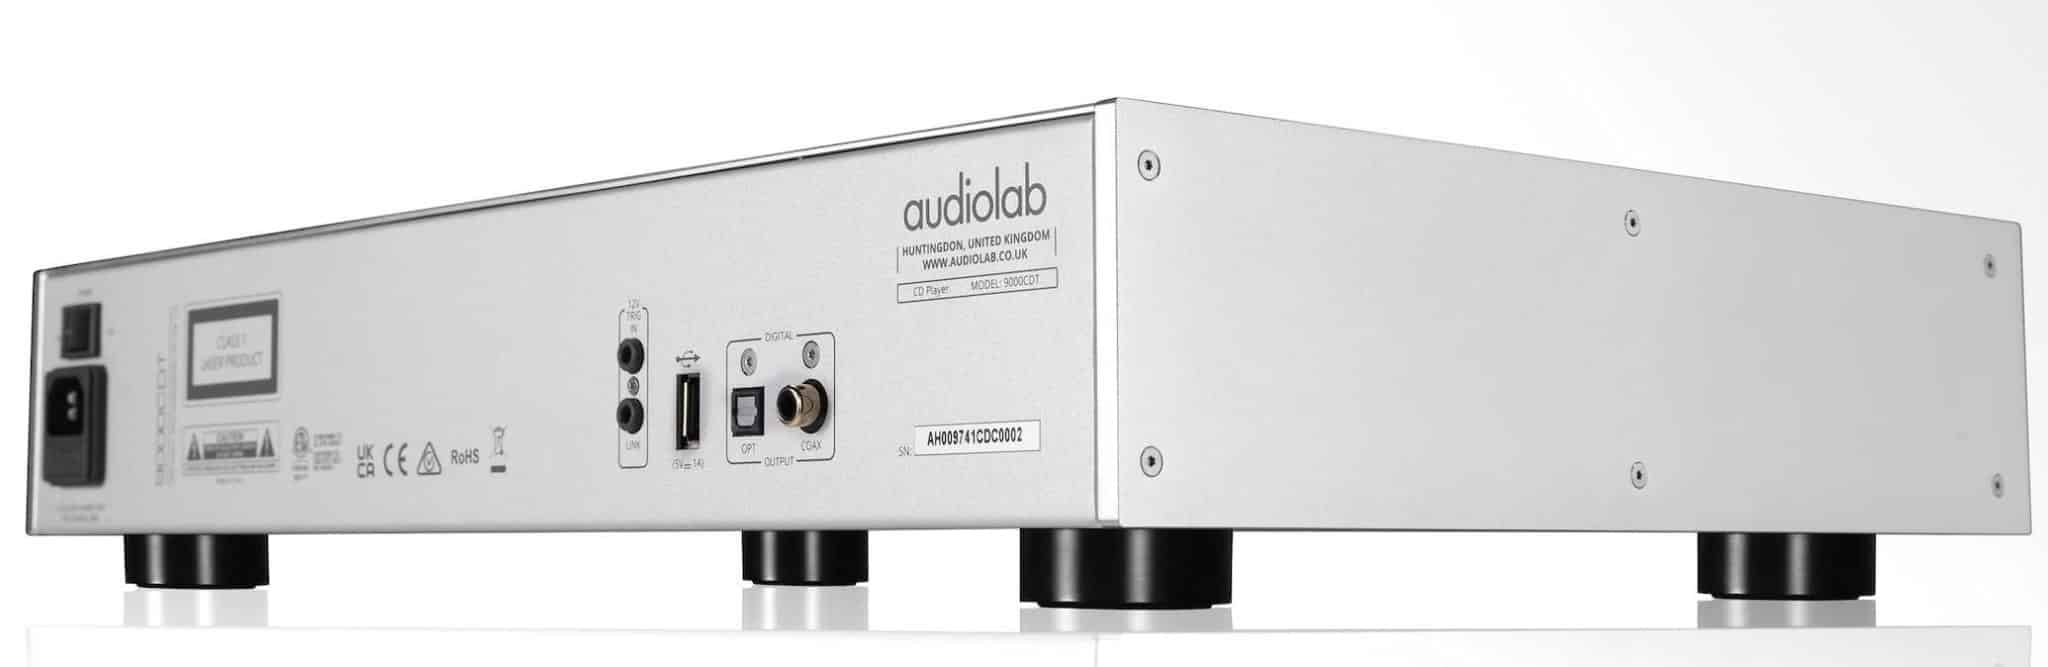 9000CDT TRANSPORT FROM AUDIOLAB